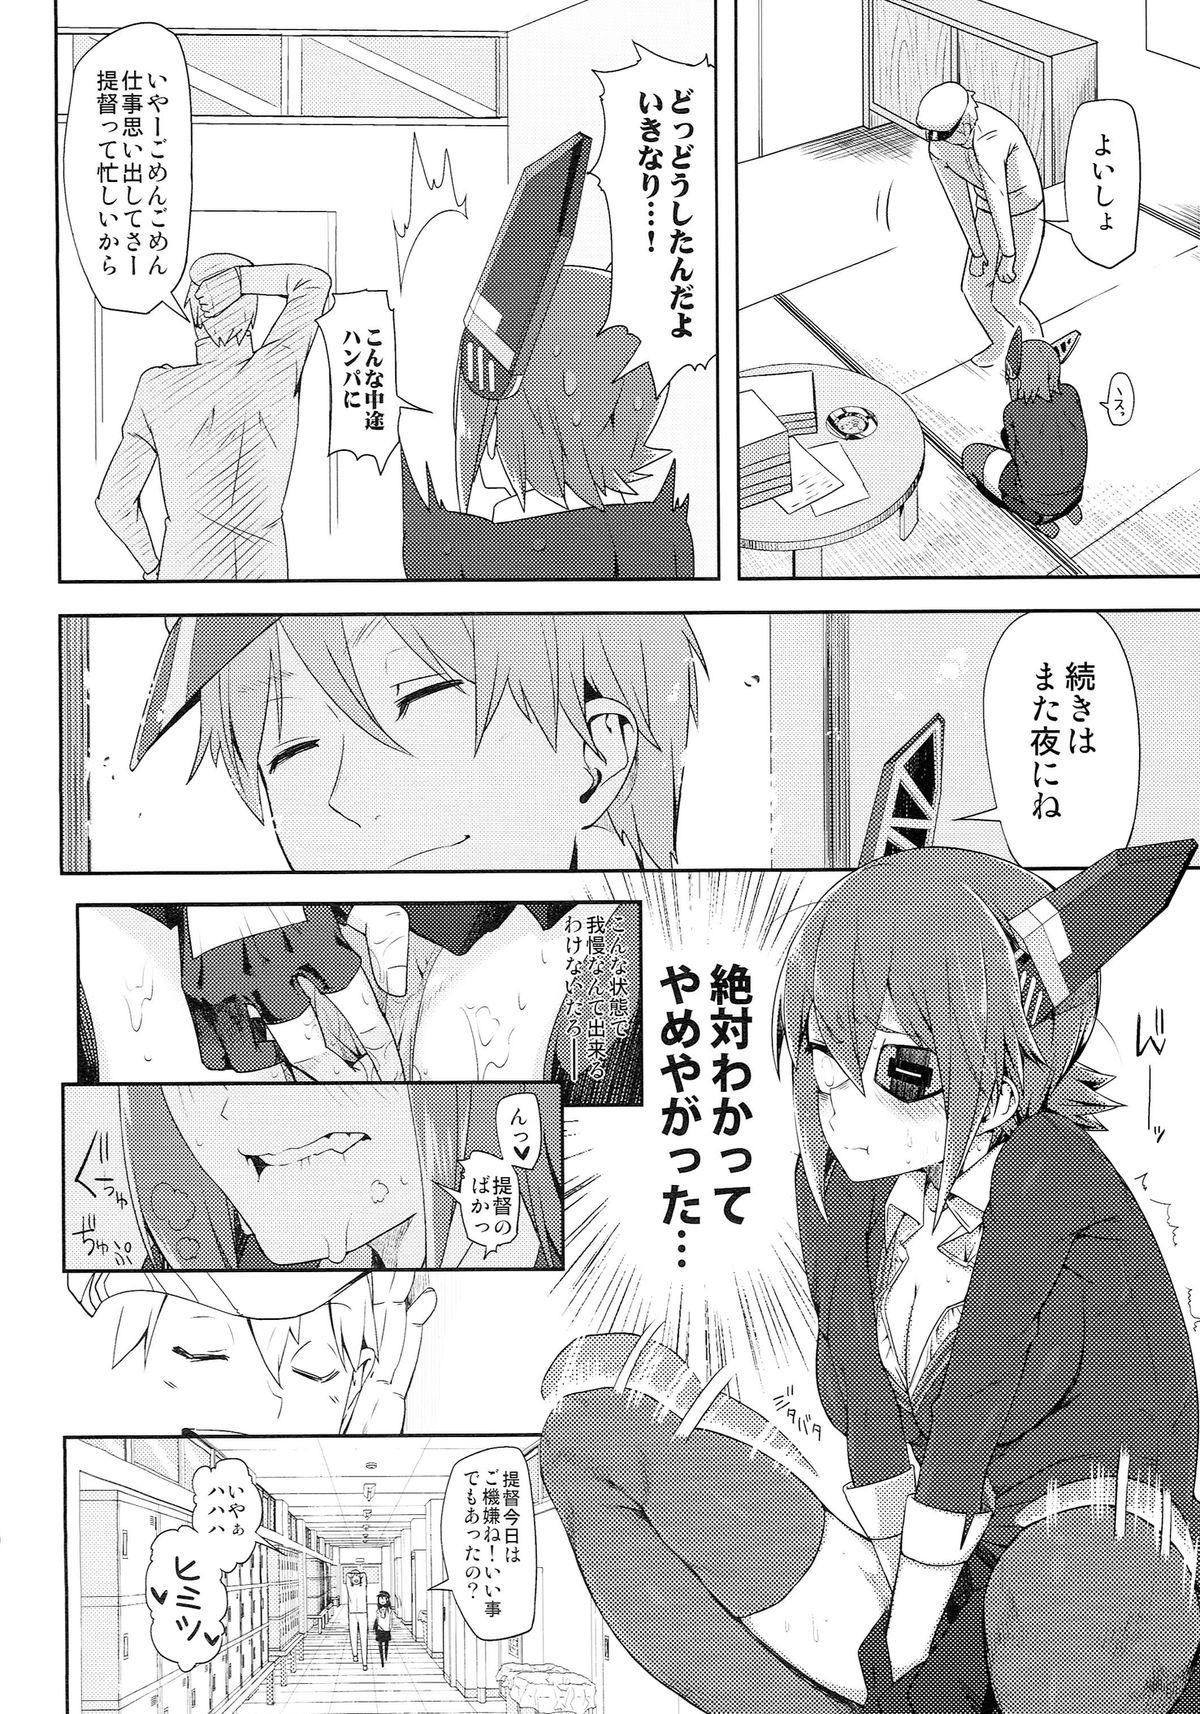 Desperate STEH - Kantai collection Group - Page 7